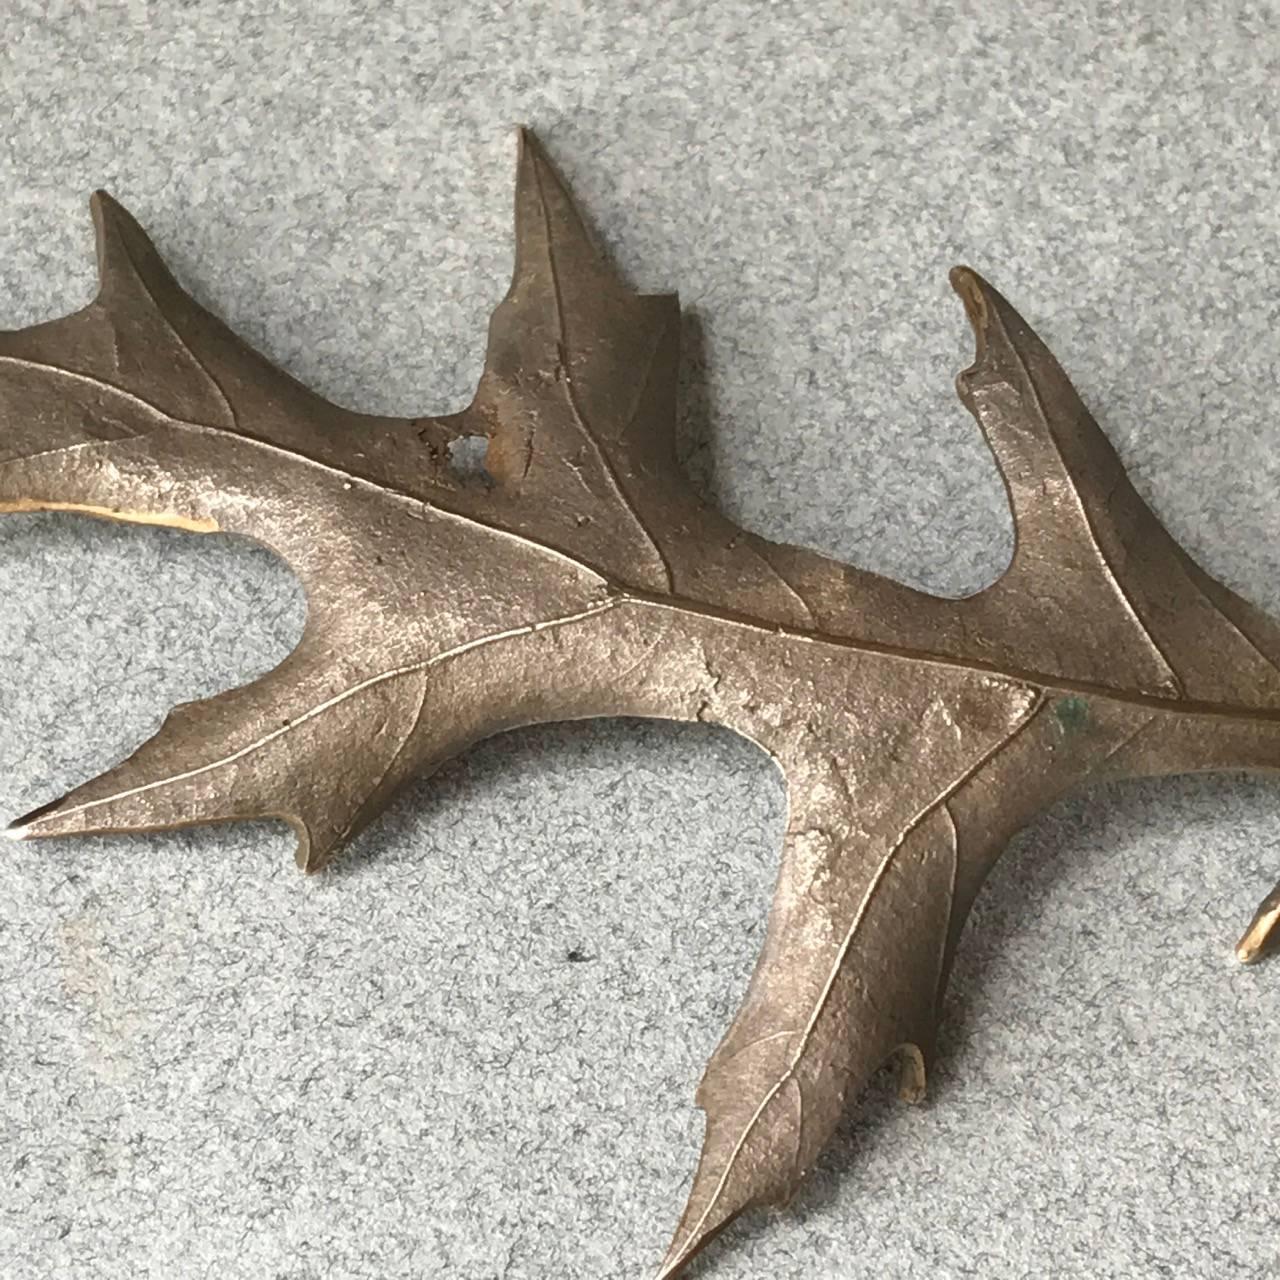 John Iversen Large Patinated  Bronze "One Of A Kind" Oak Leaf Brooch. Very Rare.

These brooches were made from individual leaves and each one is unique.

Complimentary gift box and FREE shipping included.

About the artist:
John Iversen